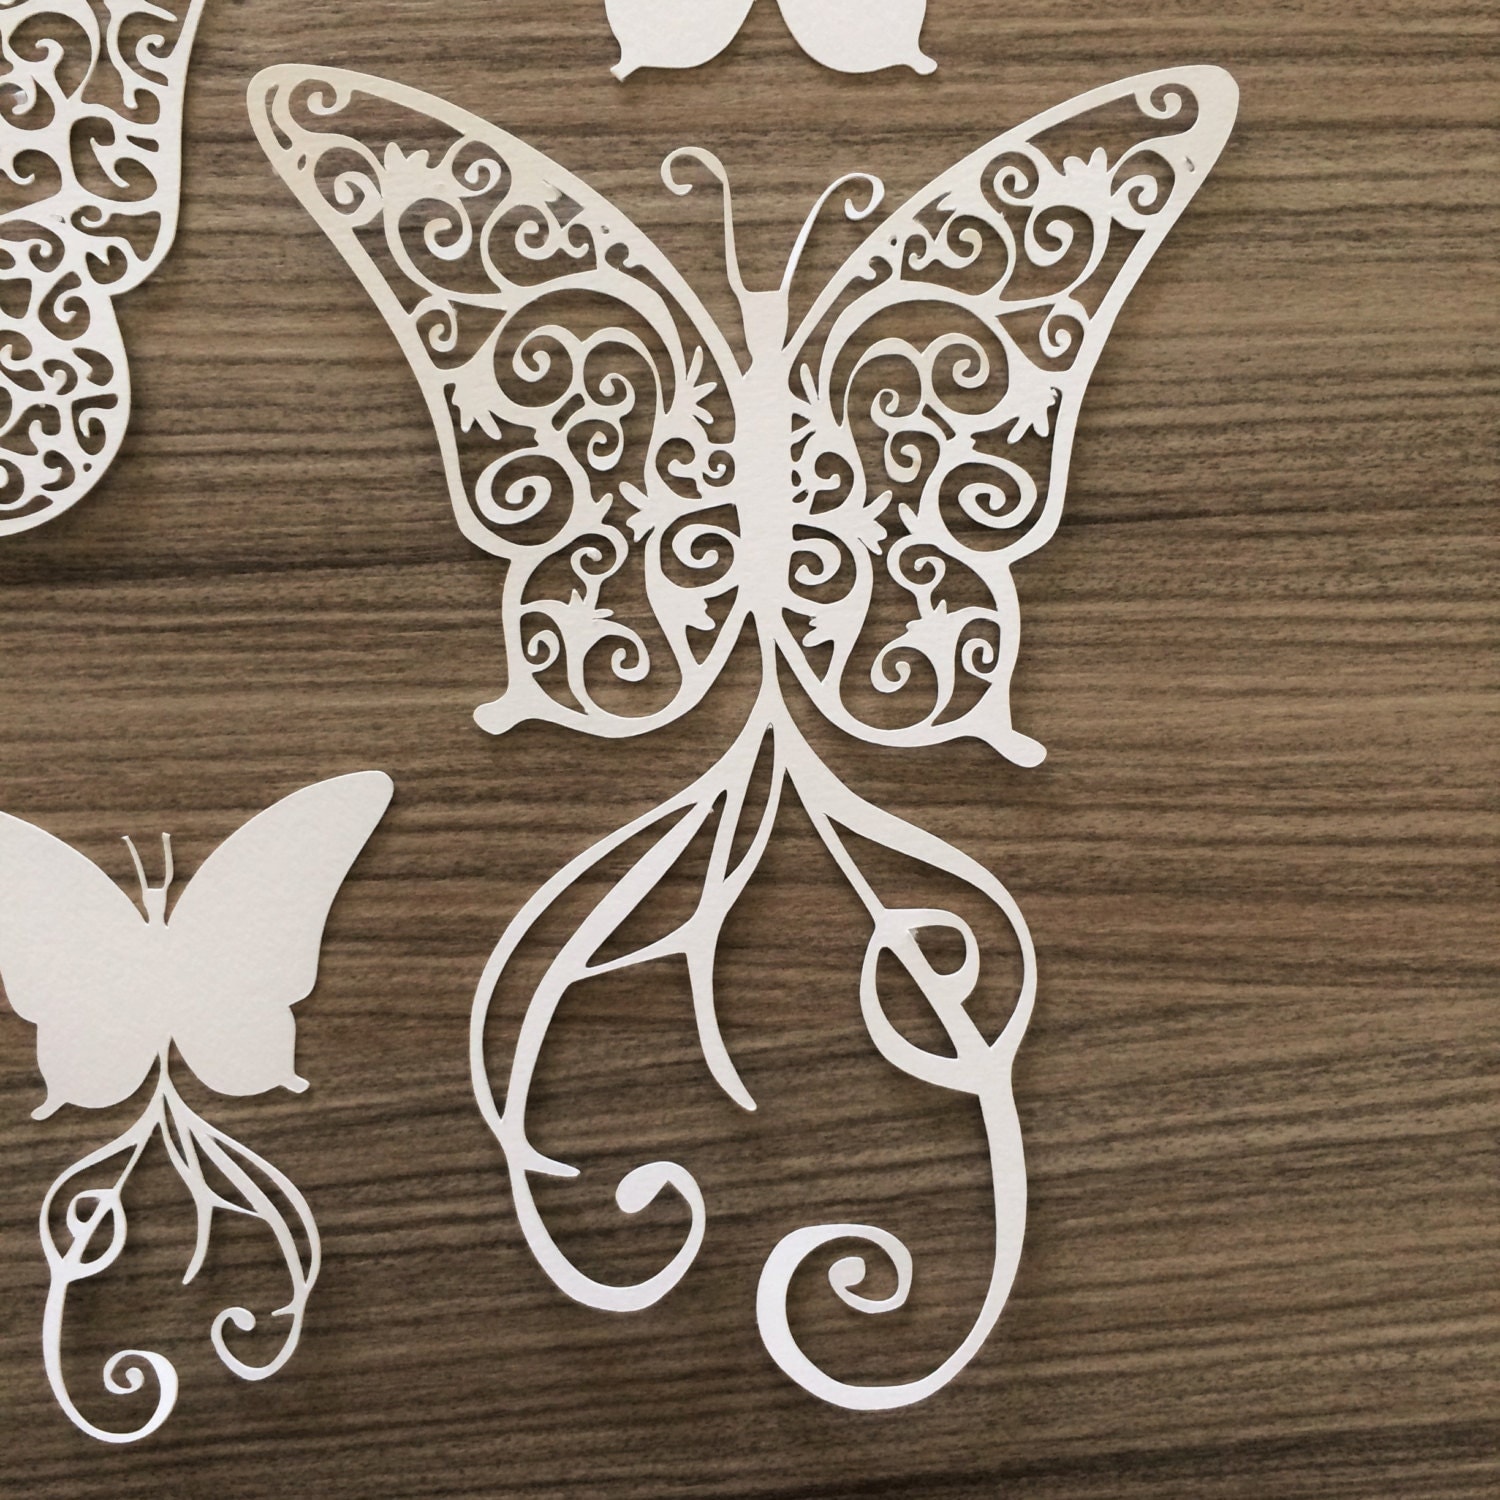 Butterflies SVG cutting file and butterfly DXF cut file